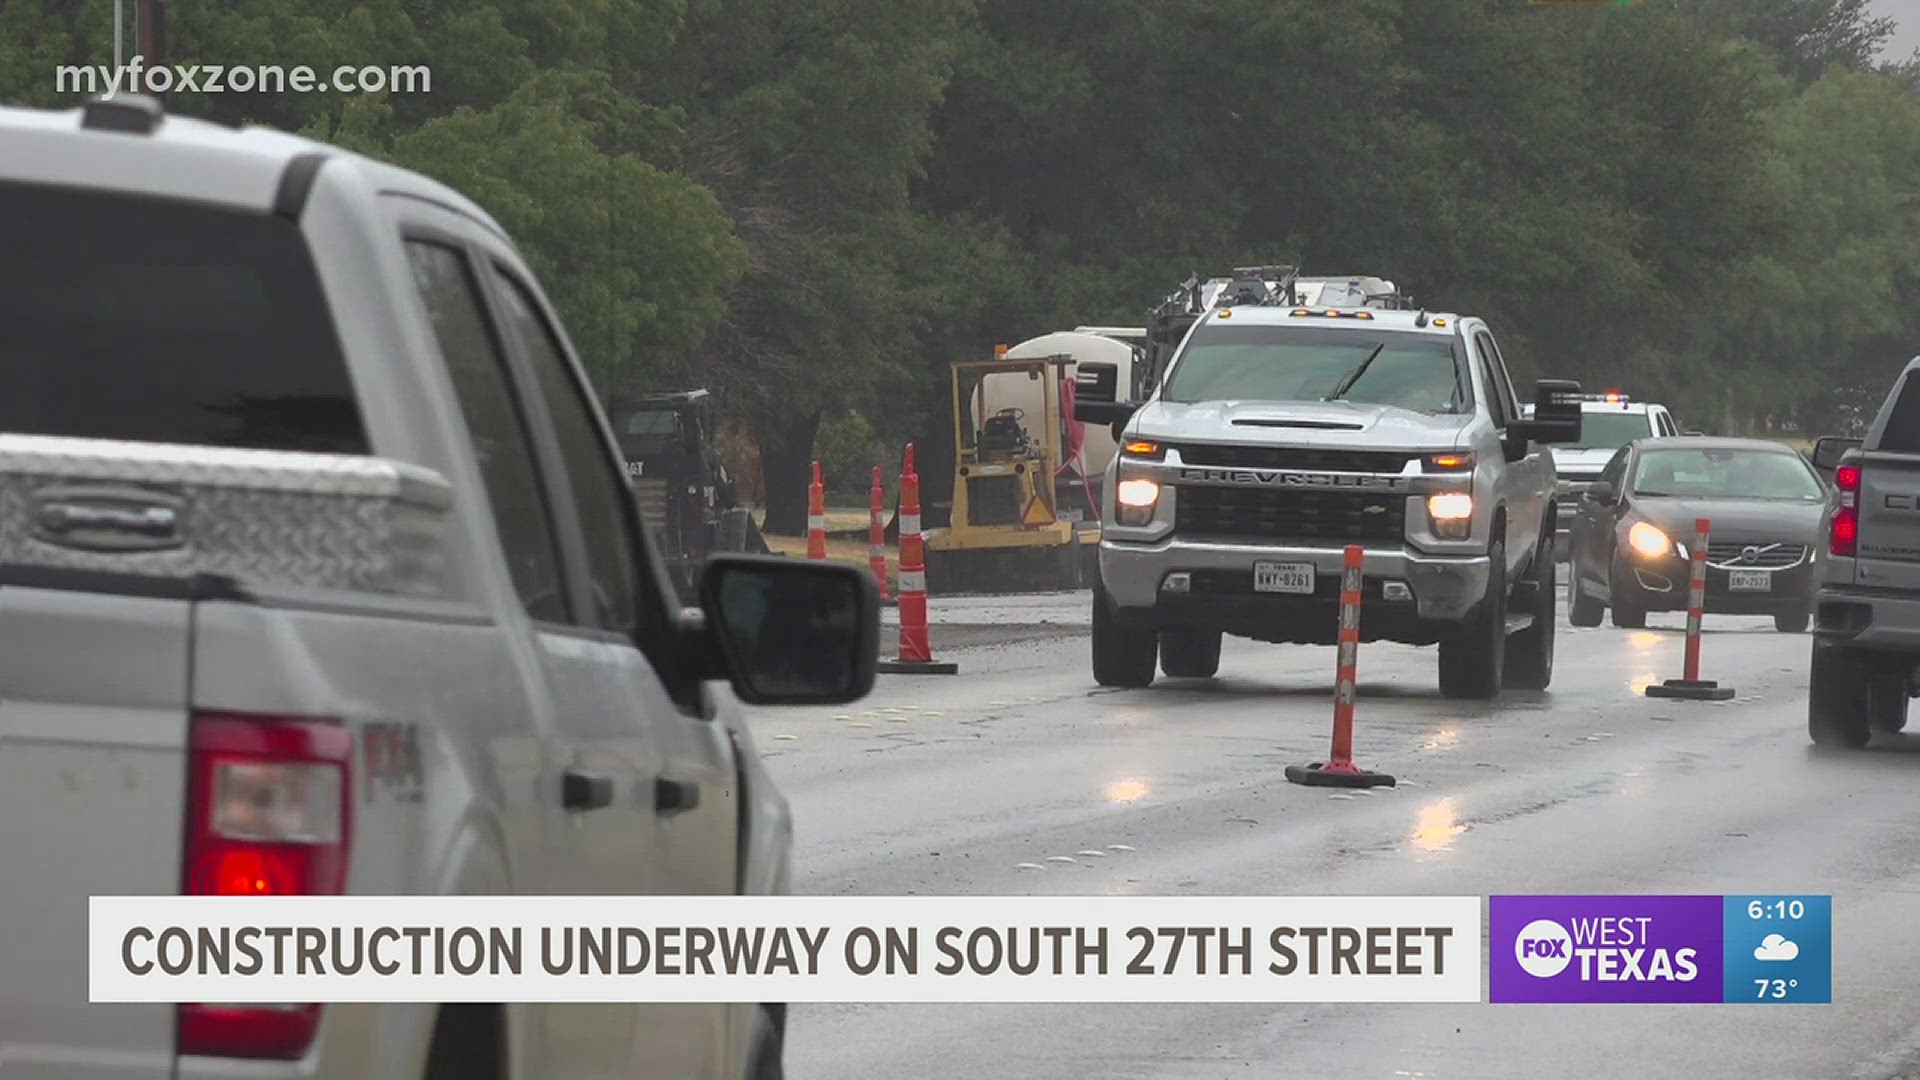 Drivers in Abilene should know about traffic flow changes made to South 27th Street due to reconstruction.